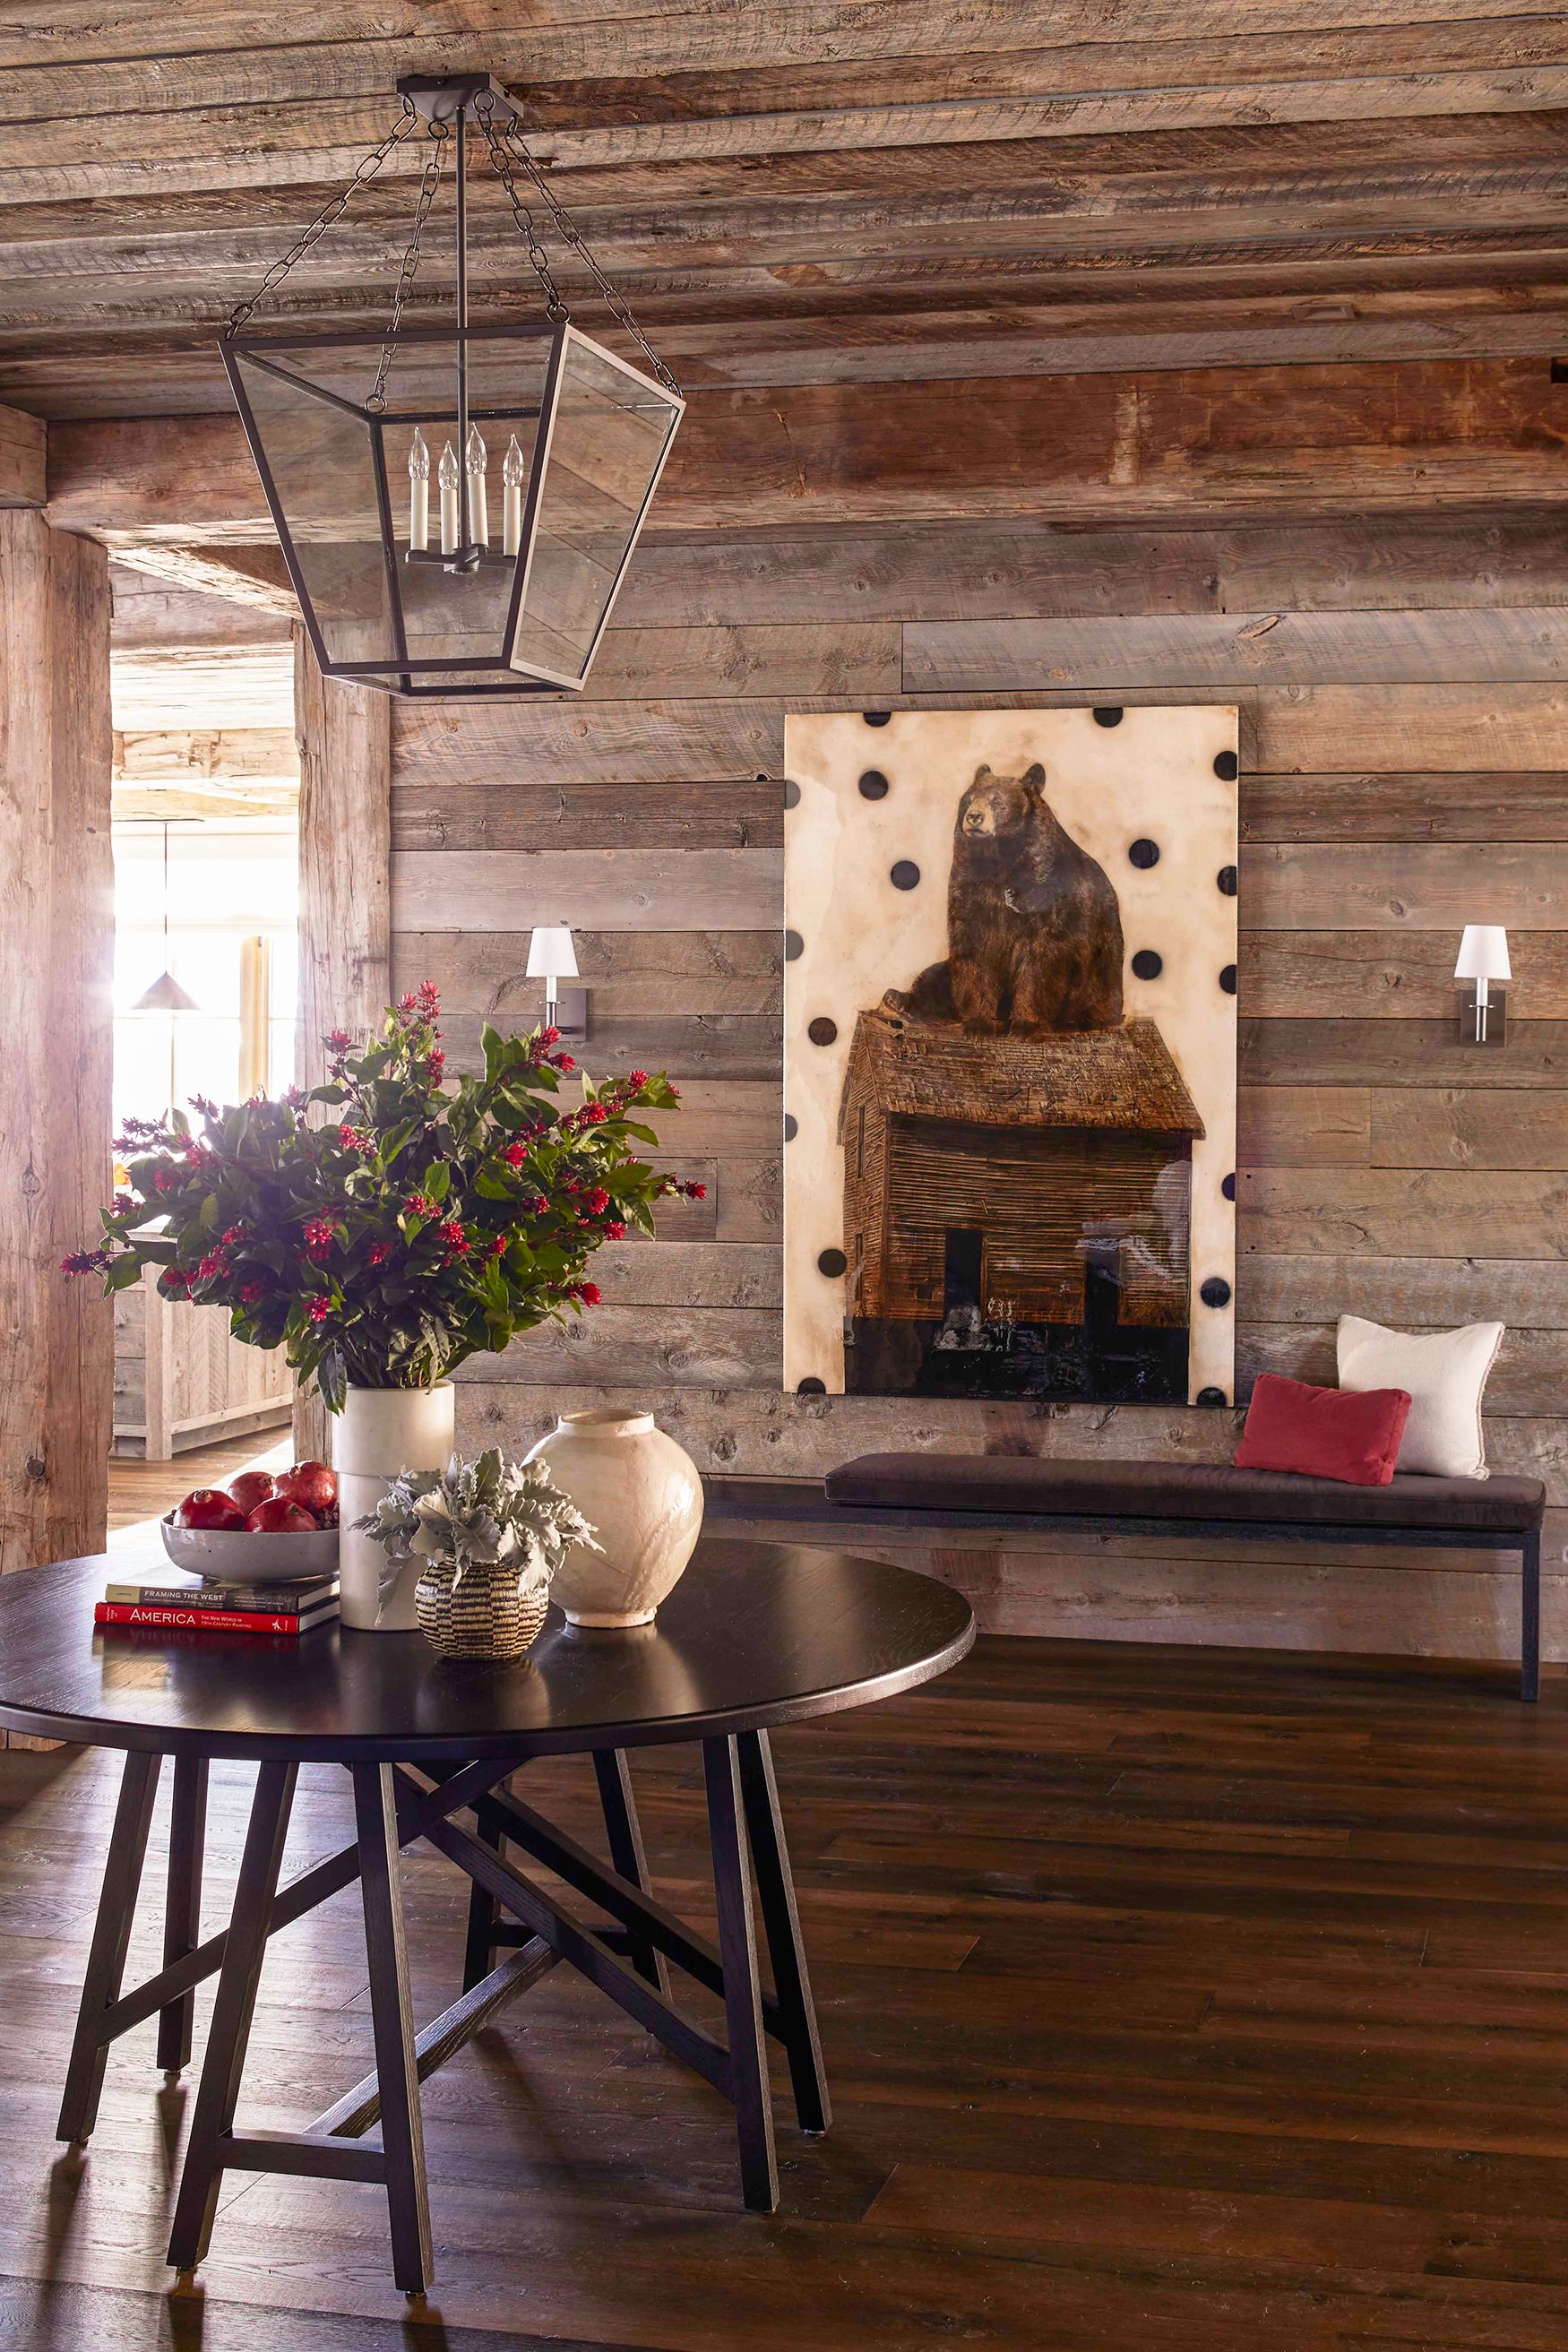 30 Rustic Home Accessories to Warm Up Your Decor